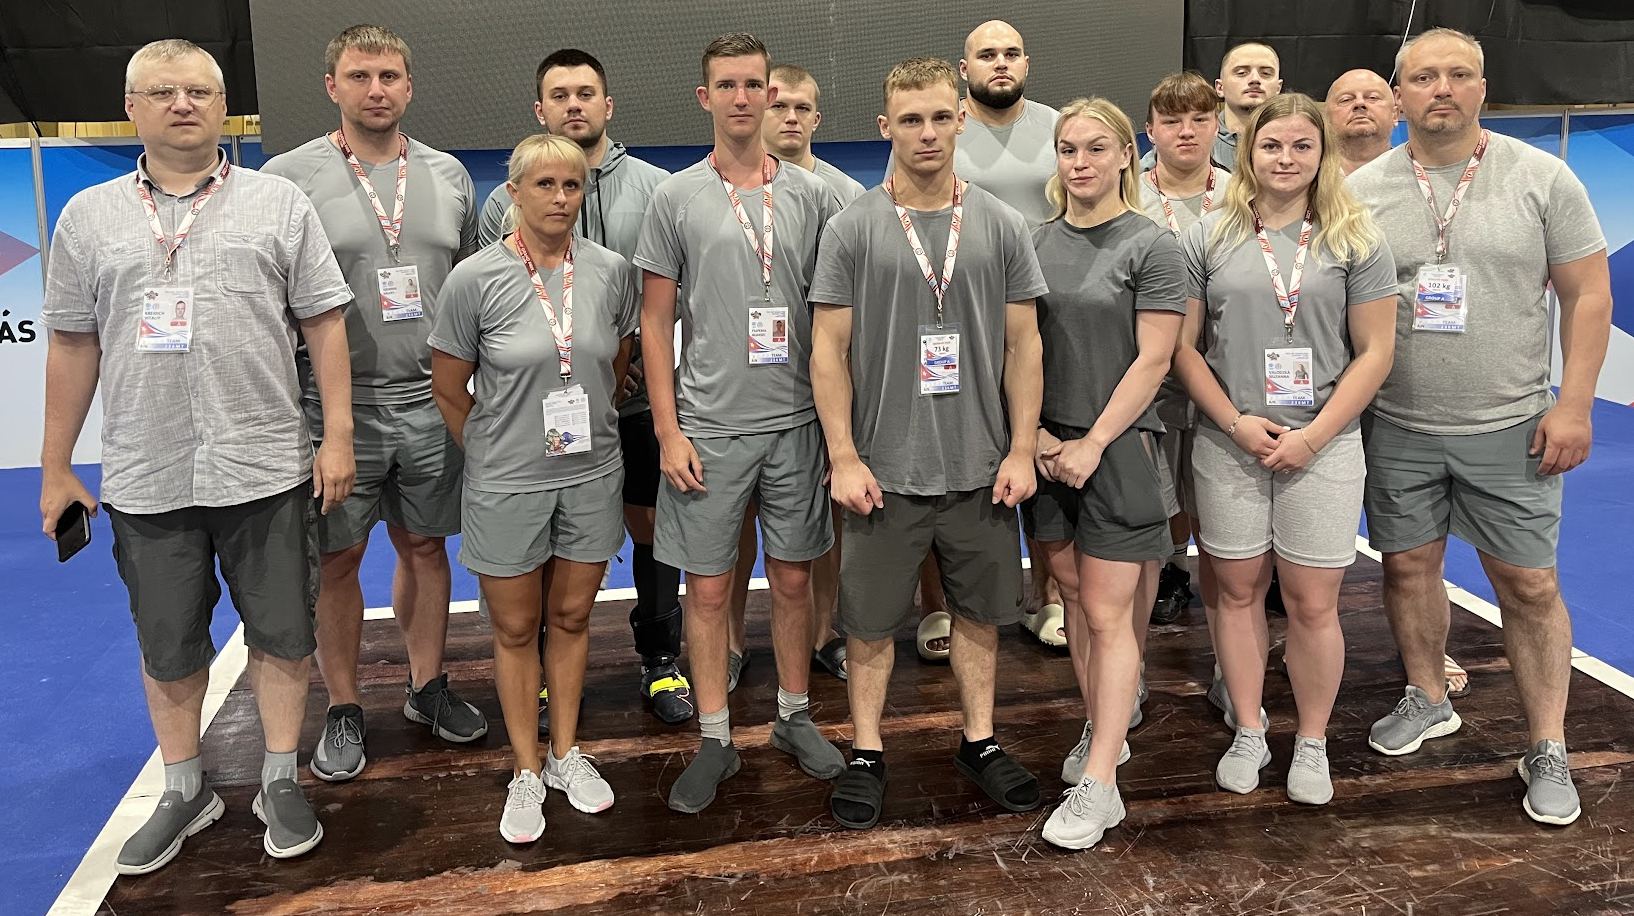 The Belarus team were forced to compete in a grey kit with no national symbols as part of conditions for competing at the IWF Grand Prix in Havana ©ITG